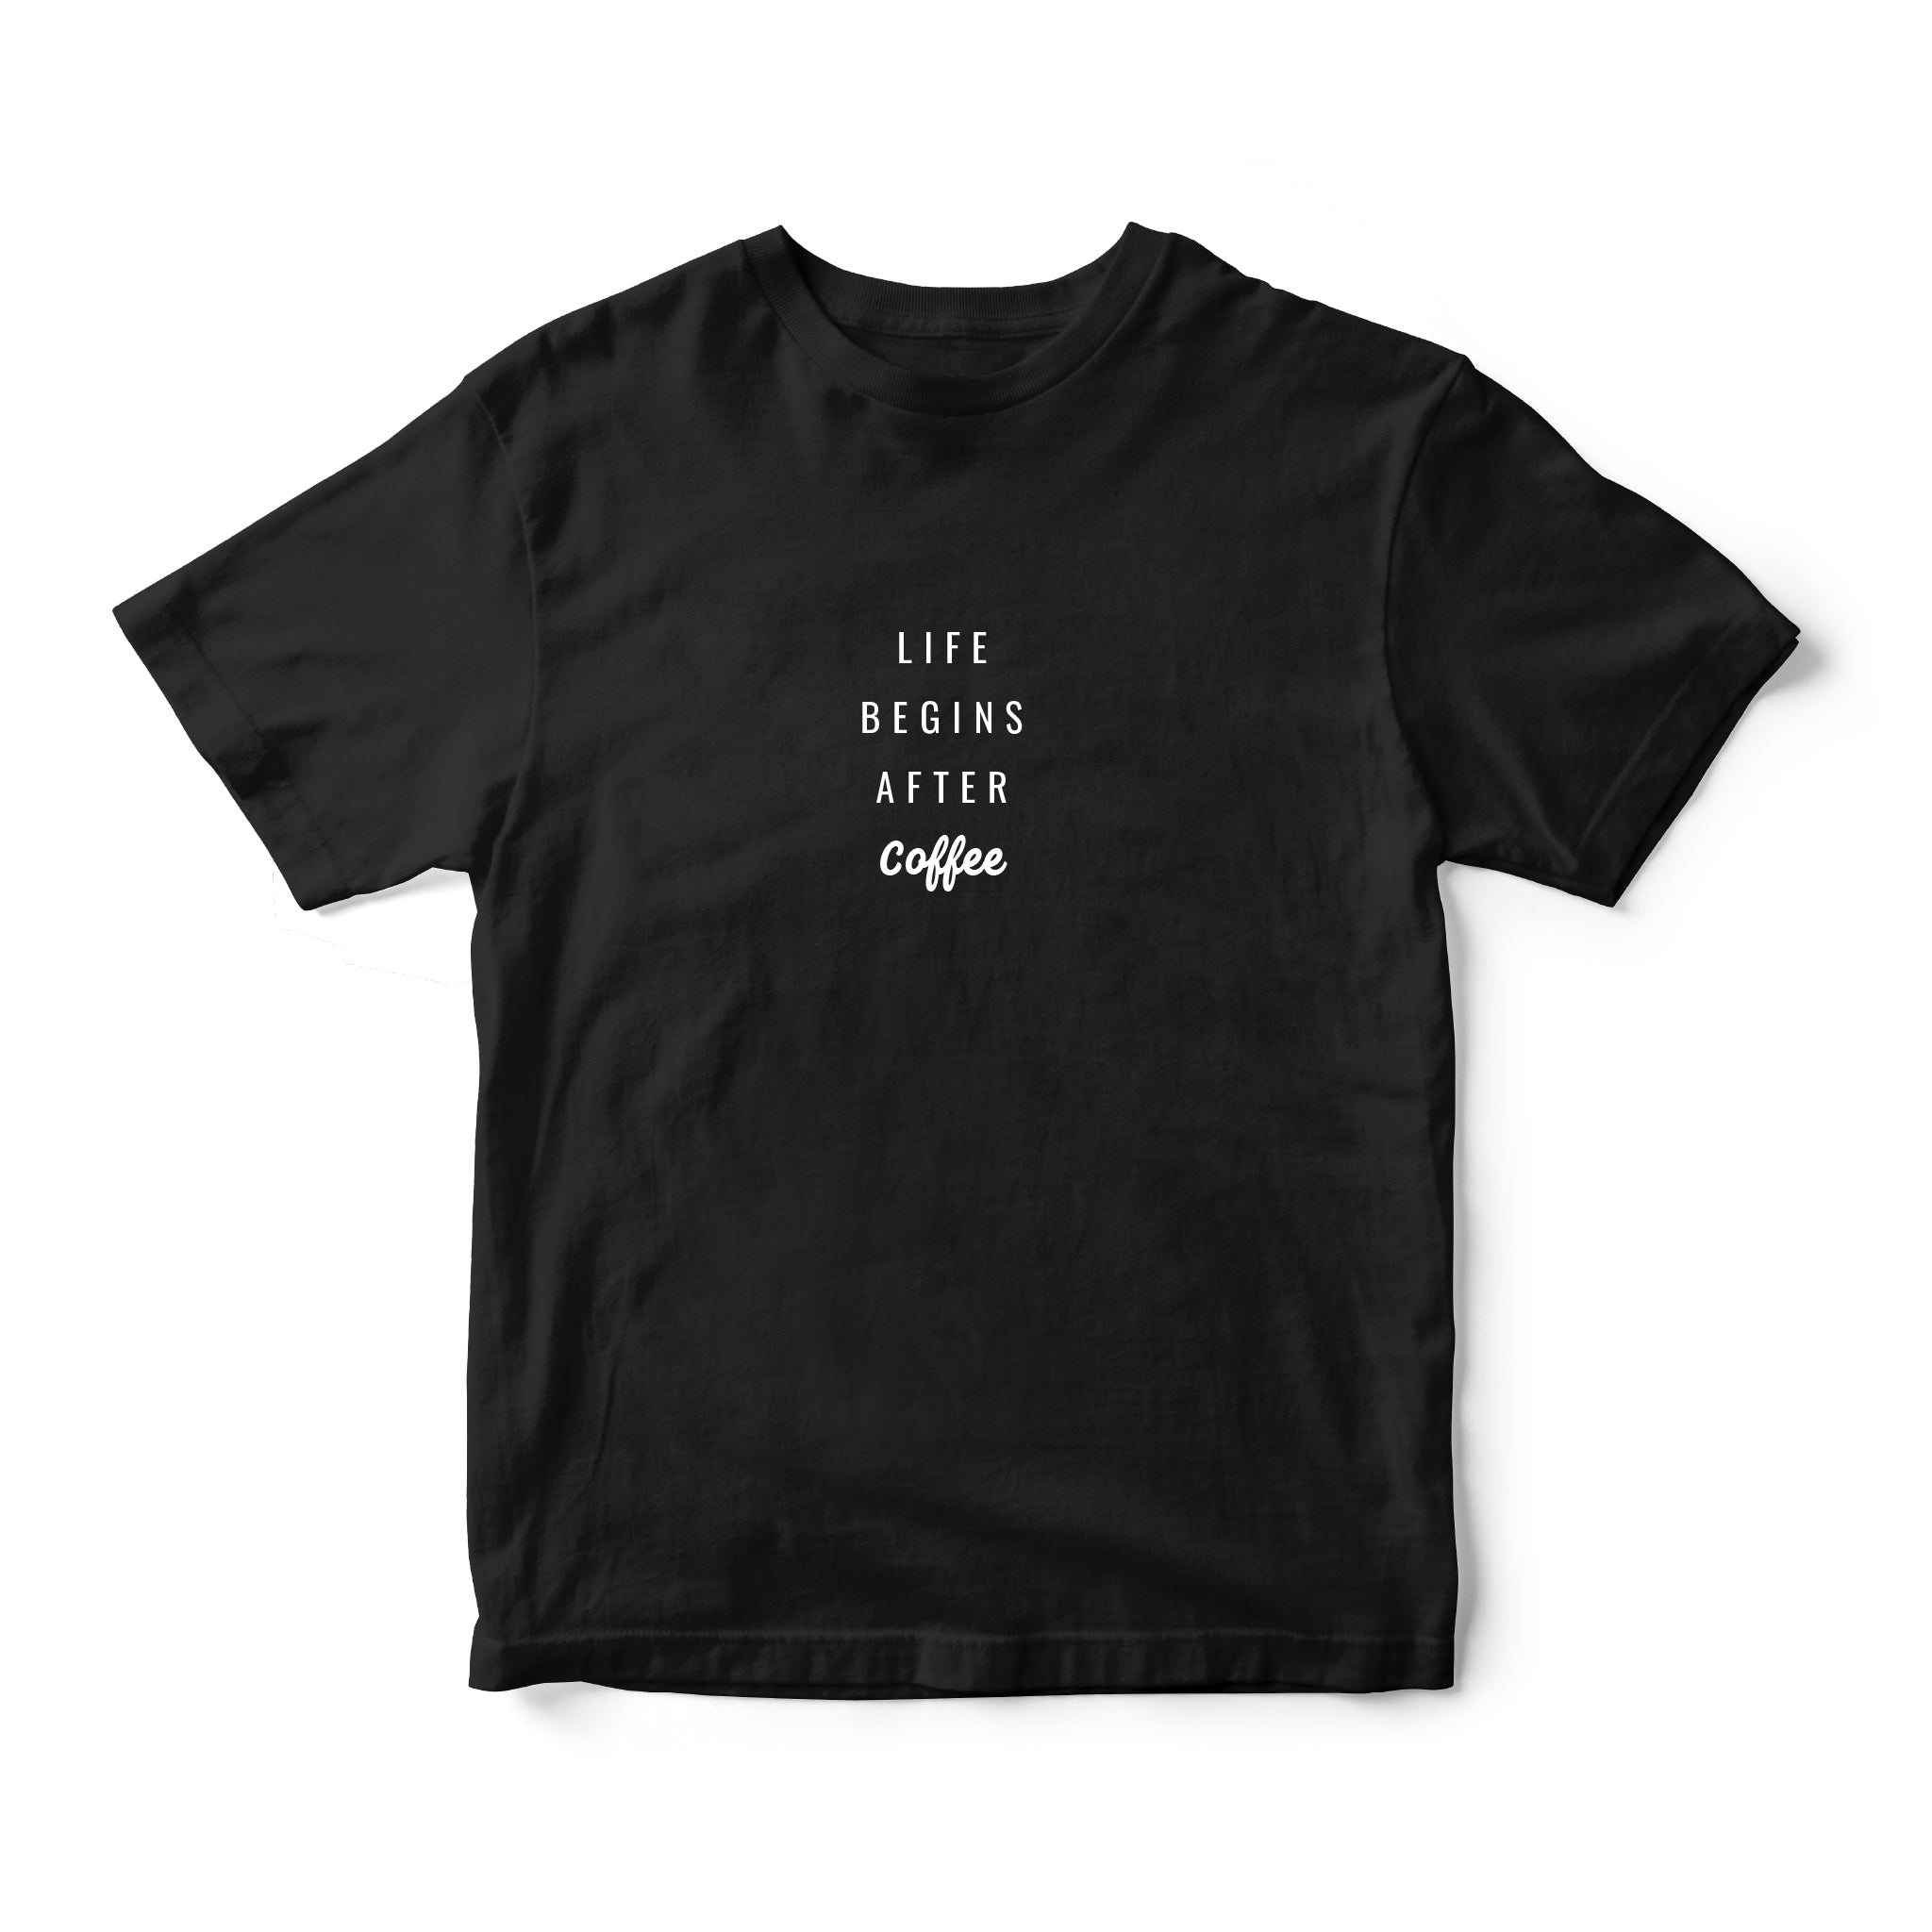 Instee Life Begins After Coffee T-shirt Unisex 100% Cotton